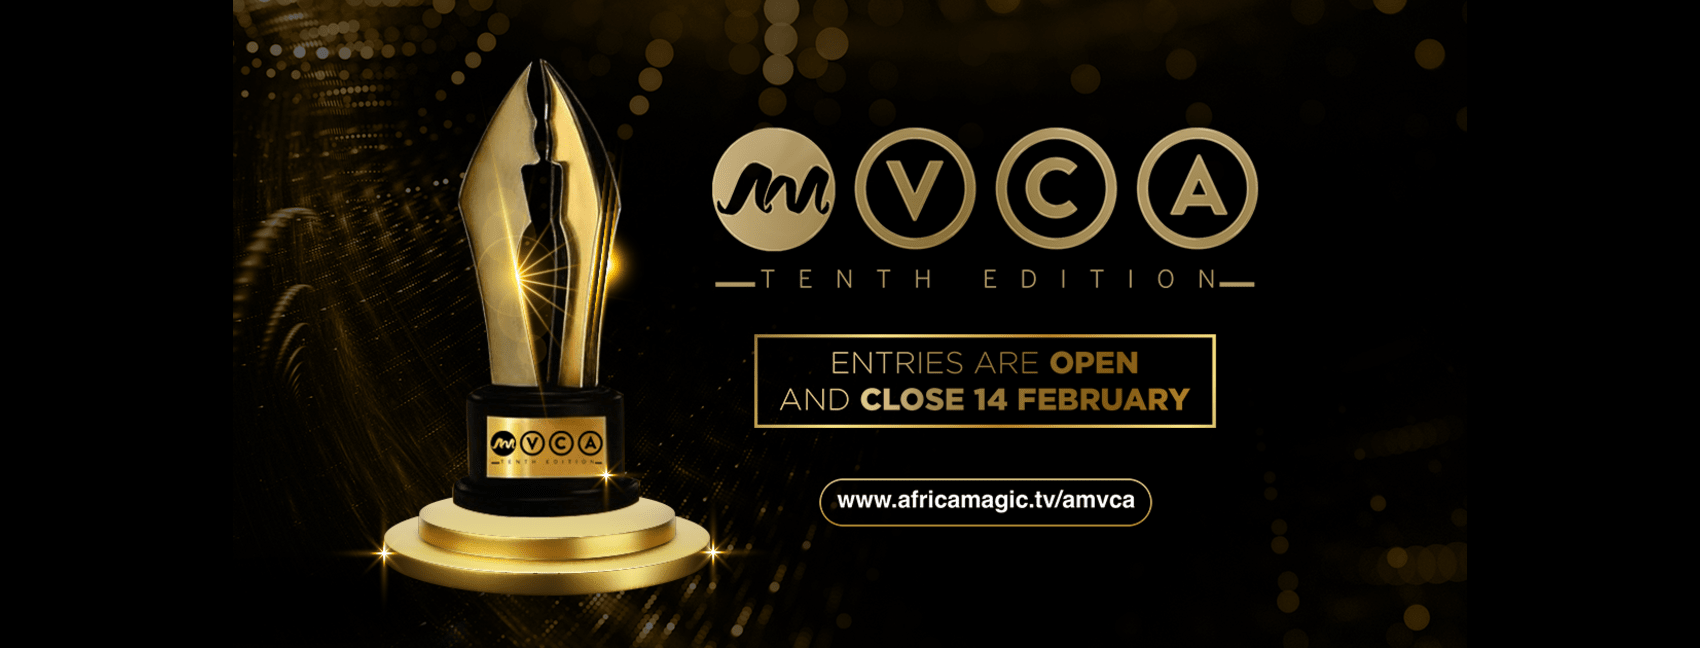 Africa Magic Viewer’s Choice Awards Announces Revamped Award Categories and Invites Entries for its 10th Edition